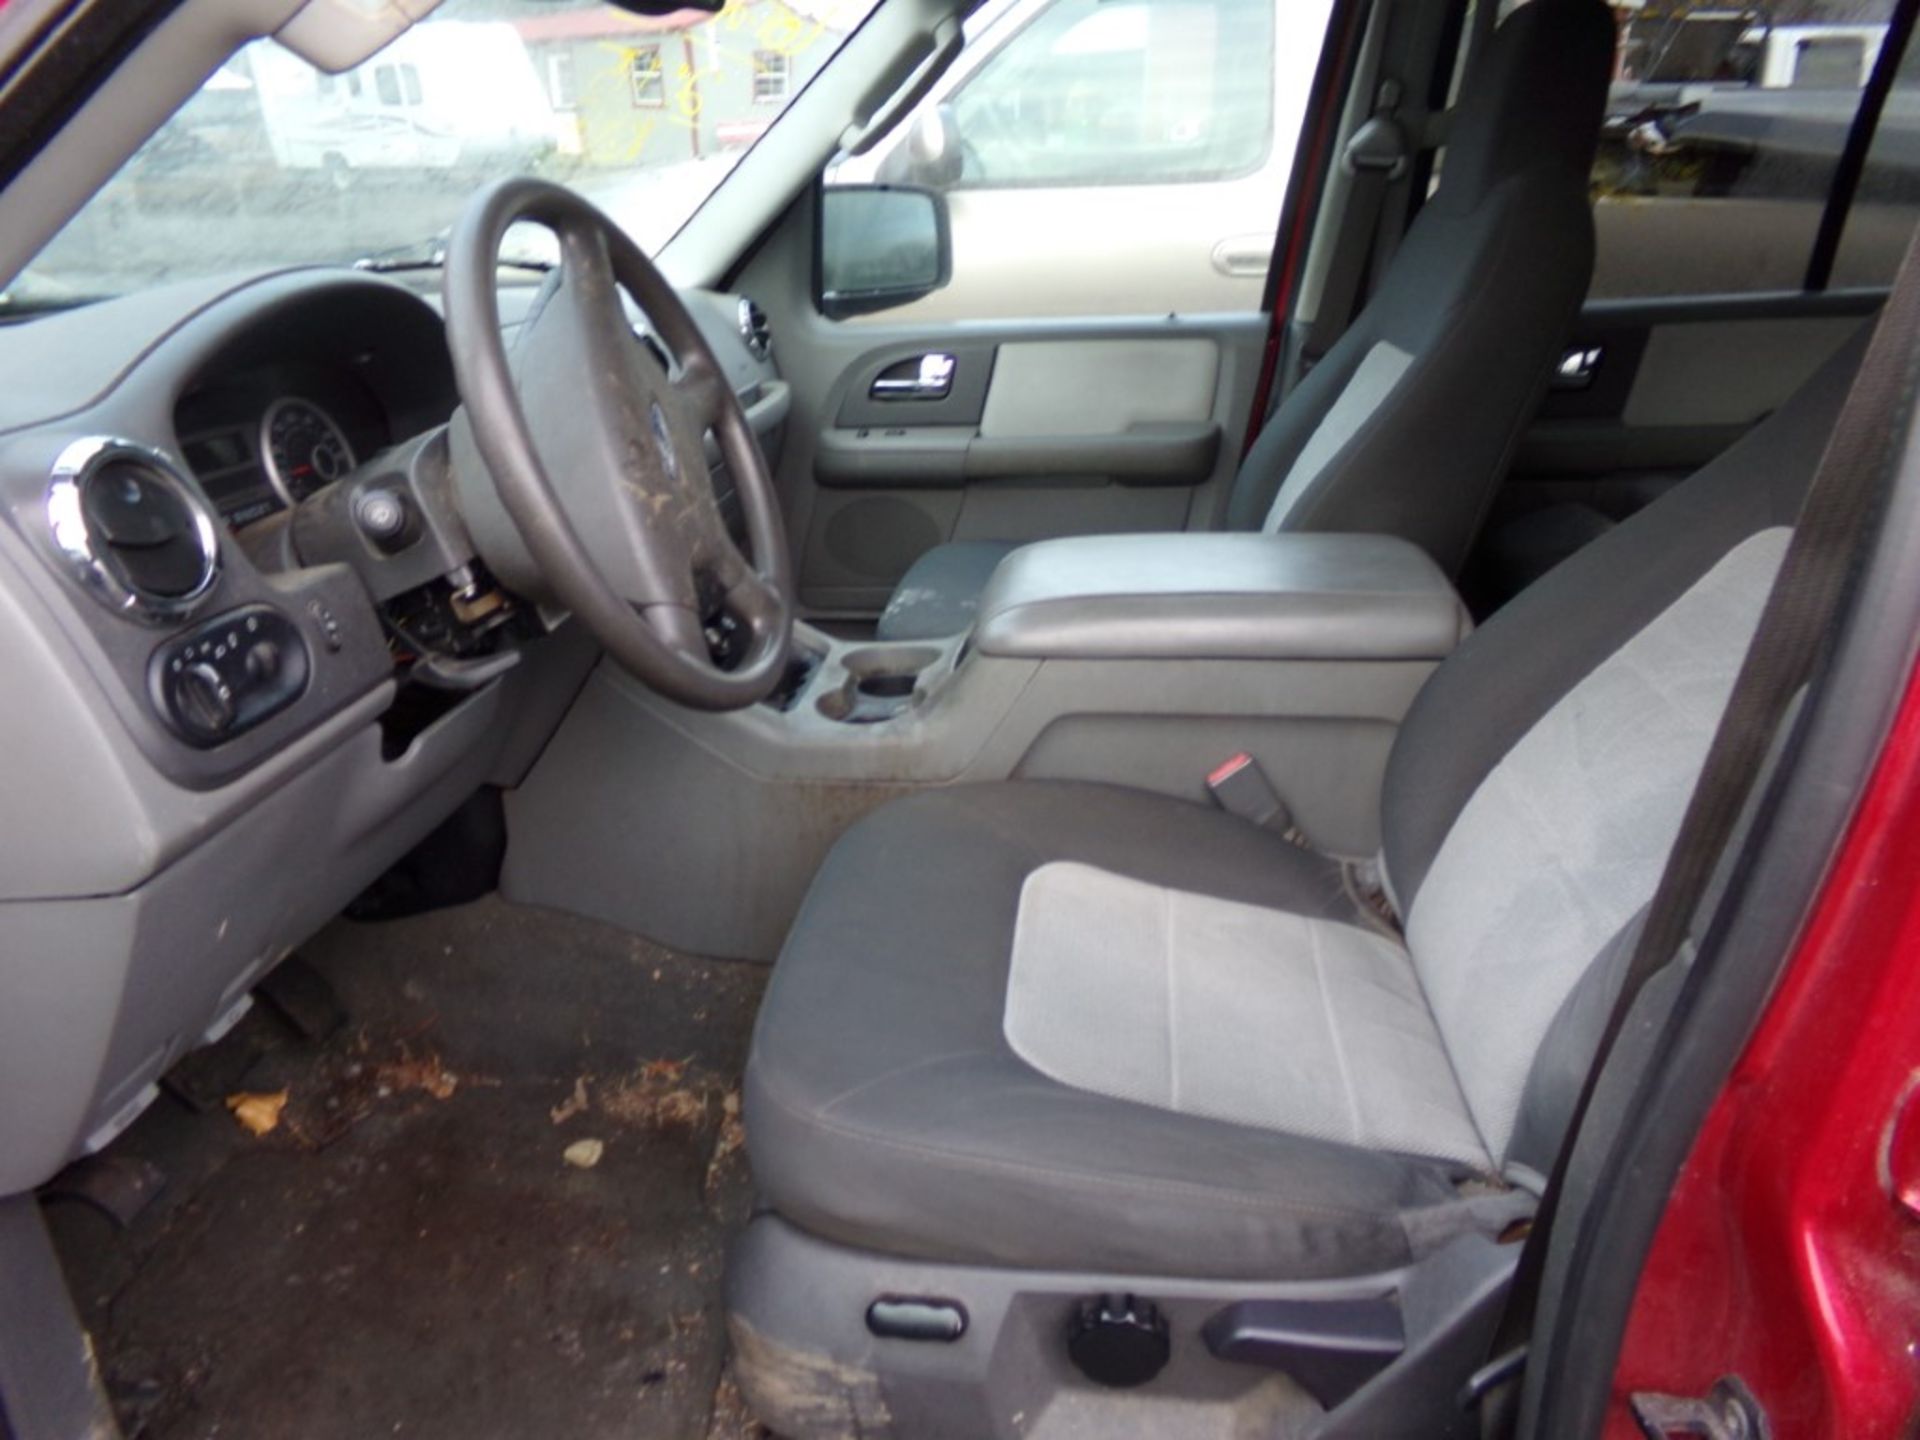 2005 Ford Expedition XLT, Maroon, 160,556 Miles, VIN#:1FMPU16515LA14681 - OPEN TO ALL BUYERS, - Image 5 of 8